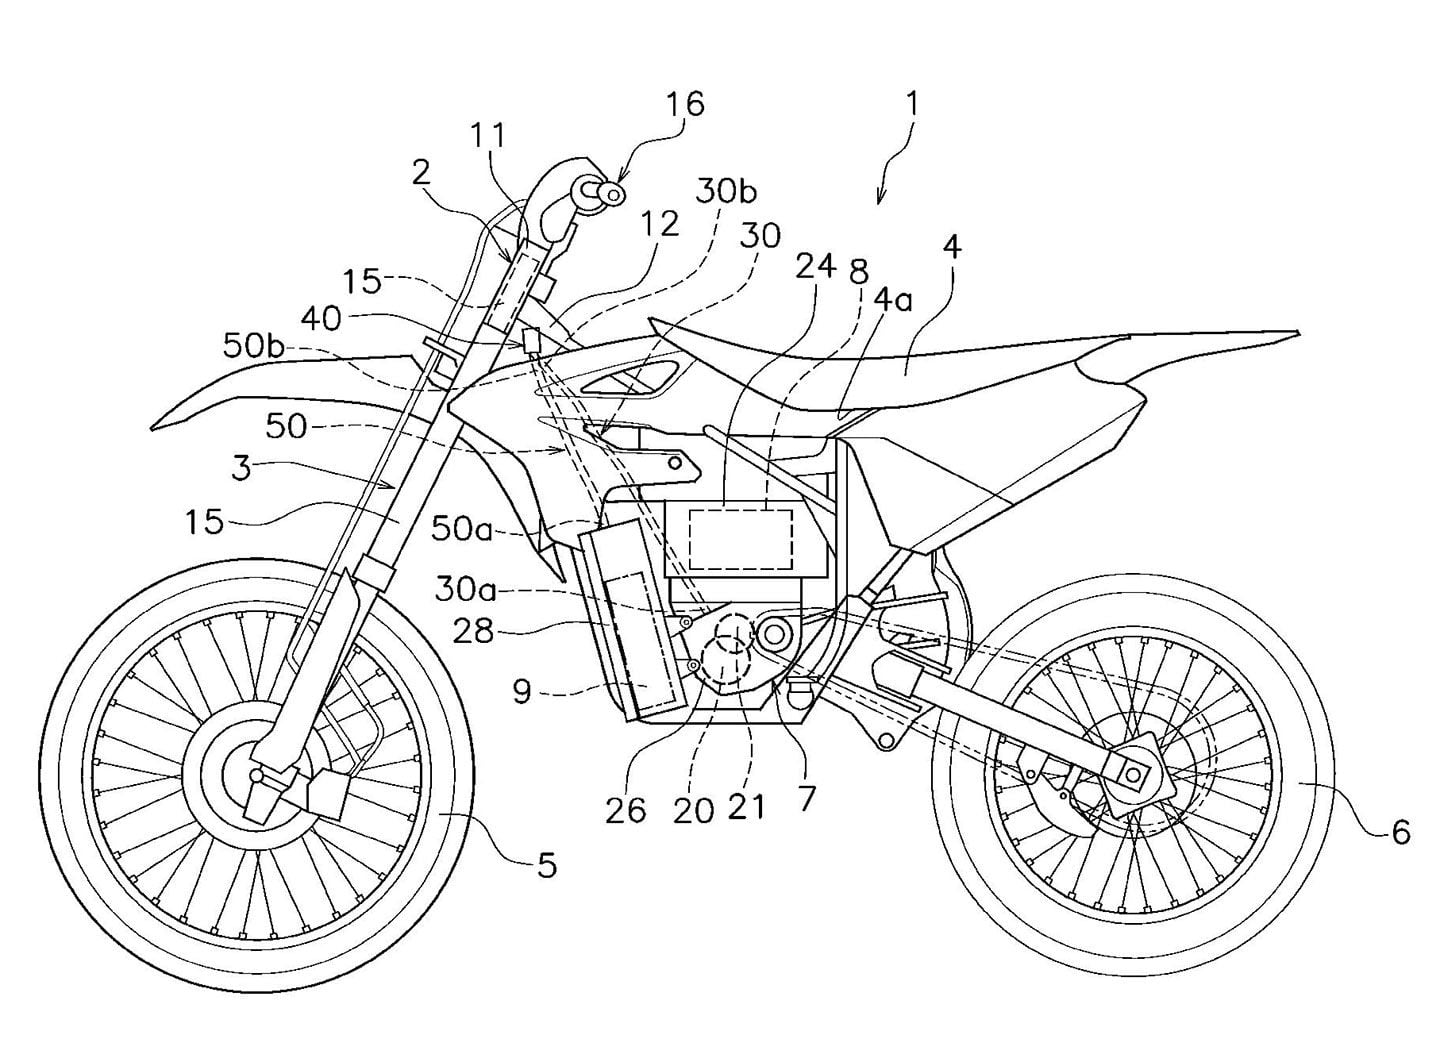 Yamaha continues development on its upcoming electric motocross bike.